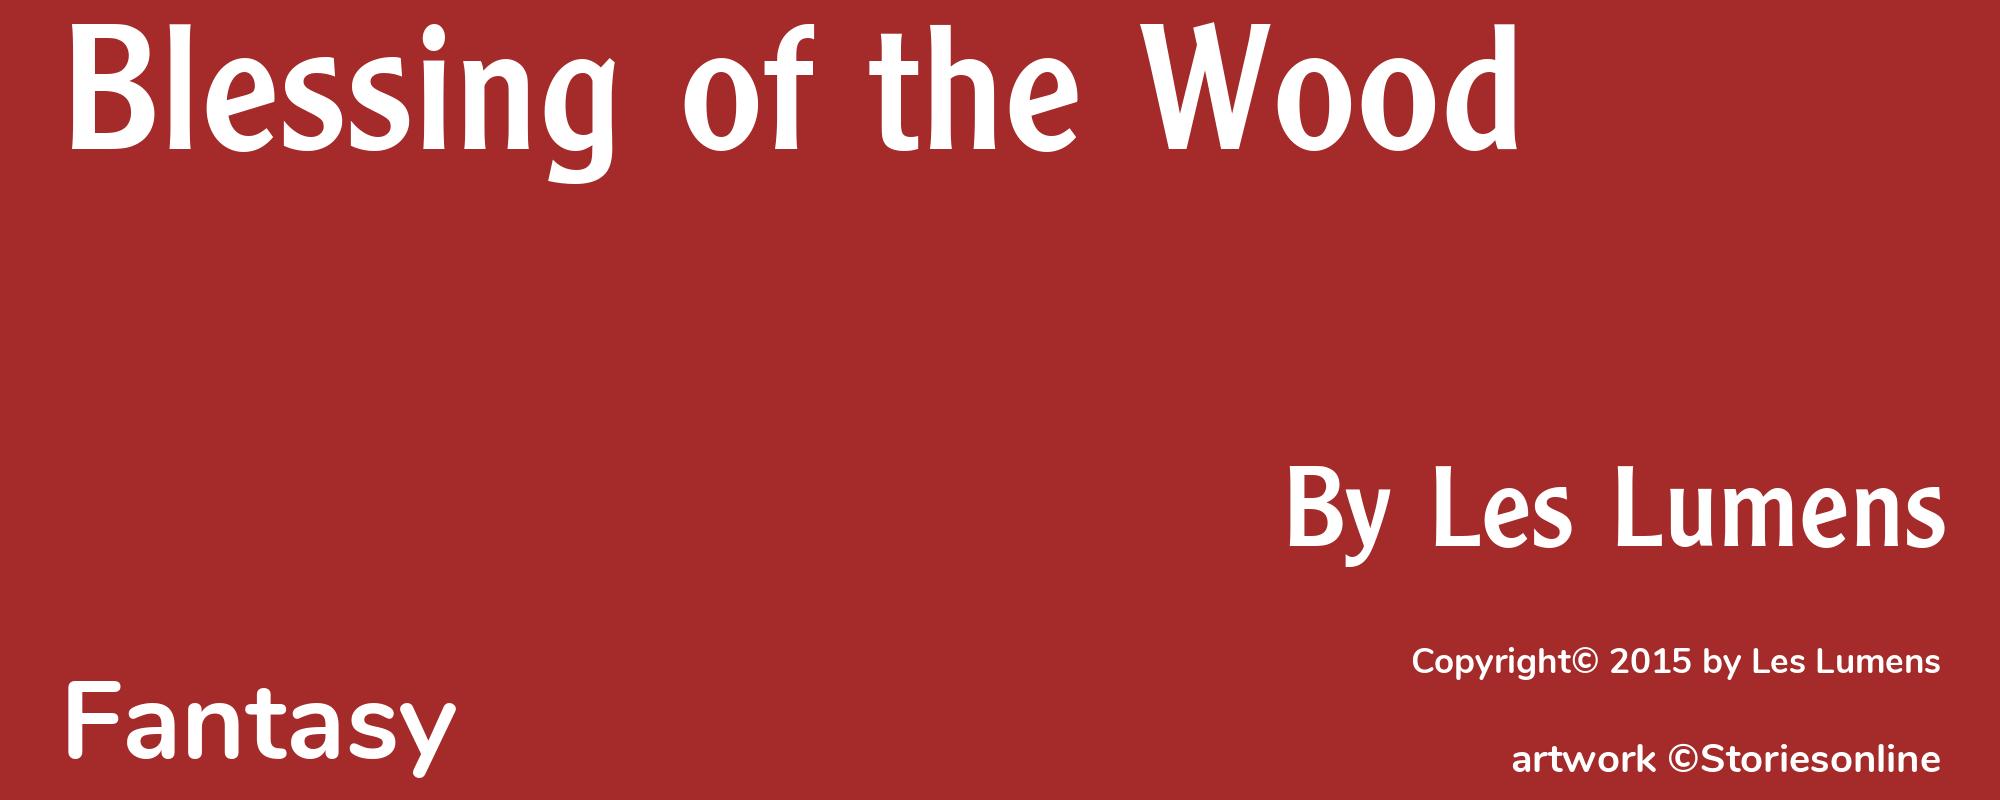 Blessing of the Wood - Cover